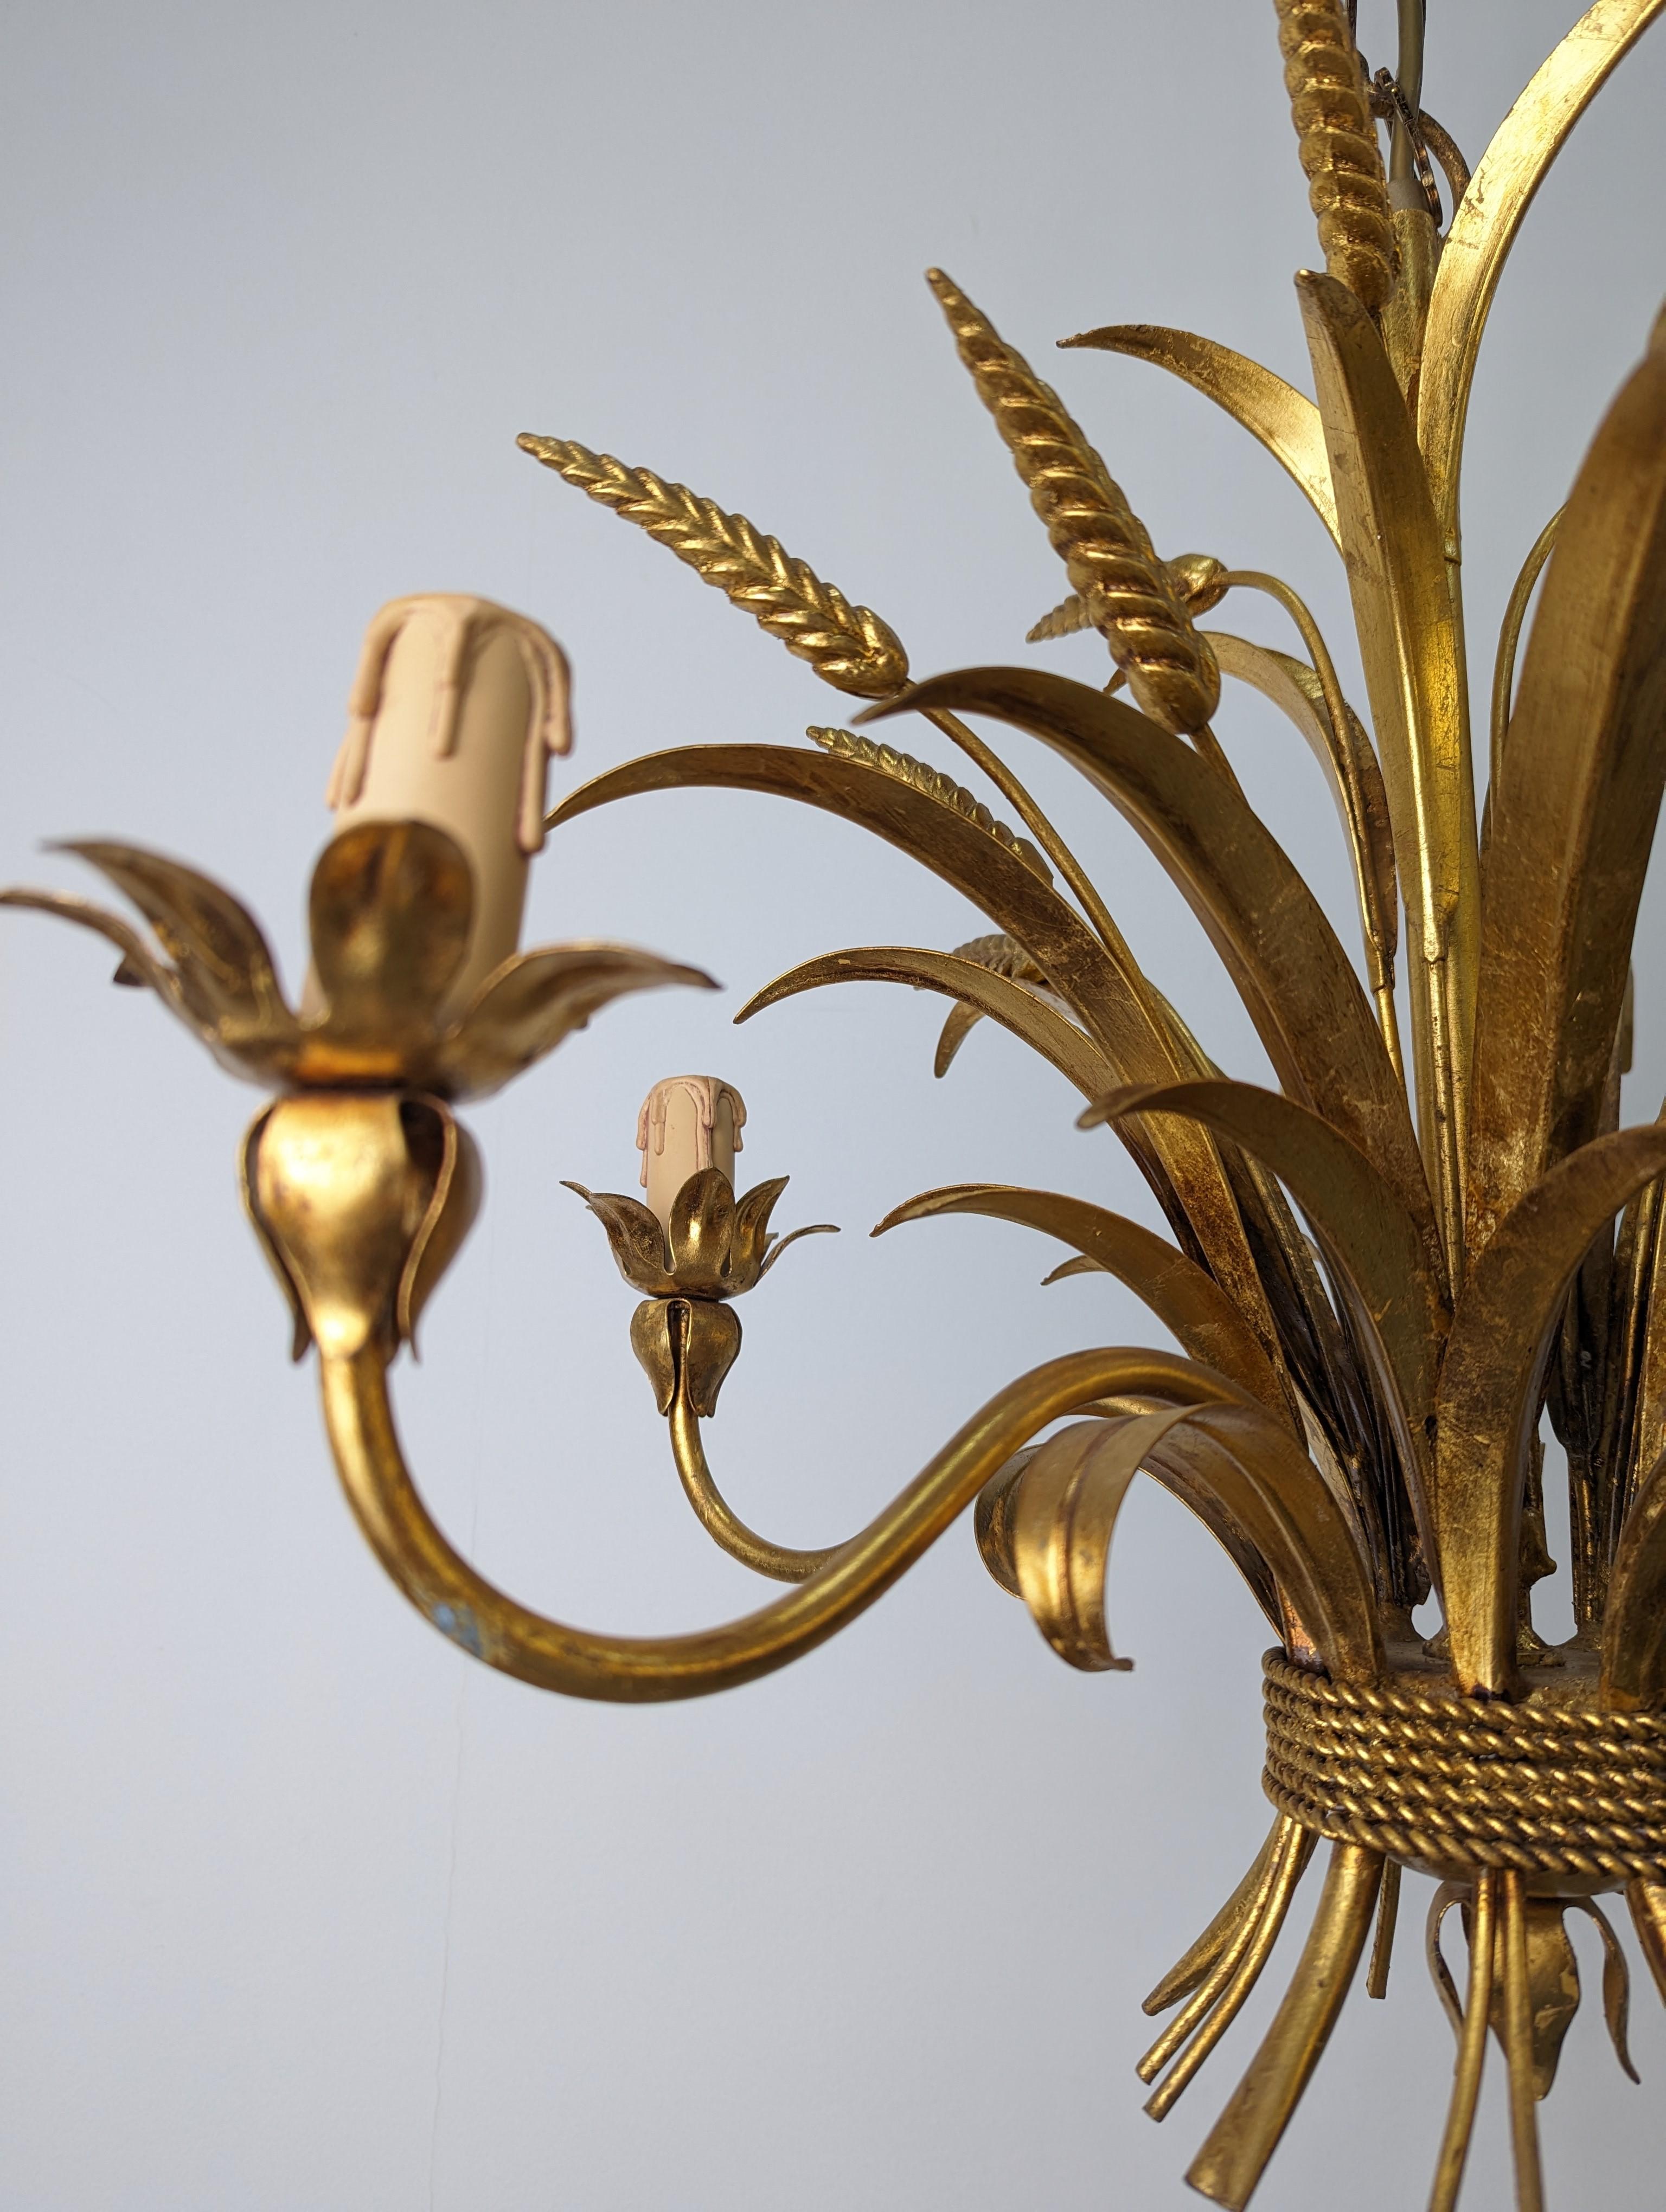 Beautiful original mid-century Italian five-arm lamp made of gold metal with an elegant wheat sheaf and leaf design.

Total length with chain 80cm